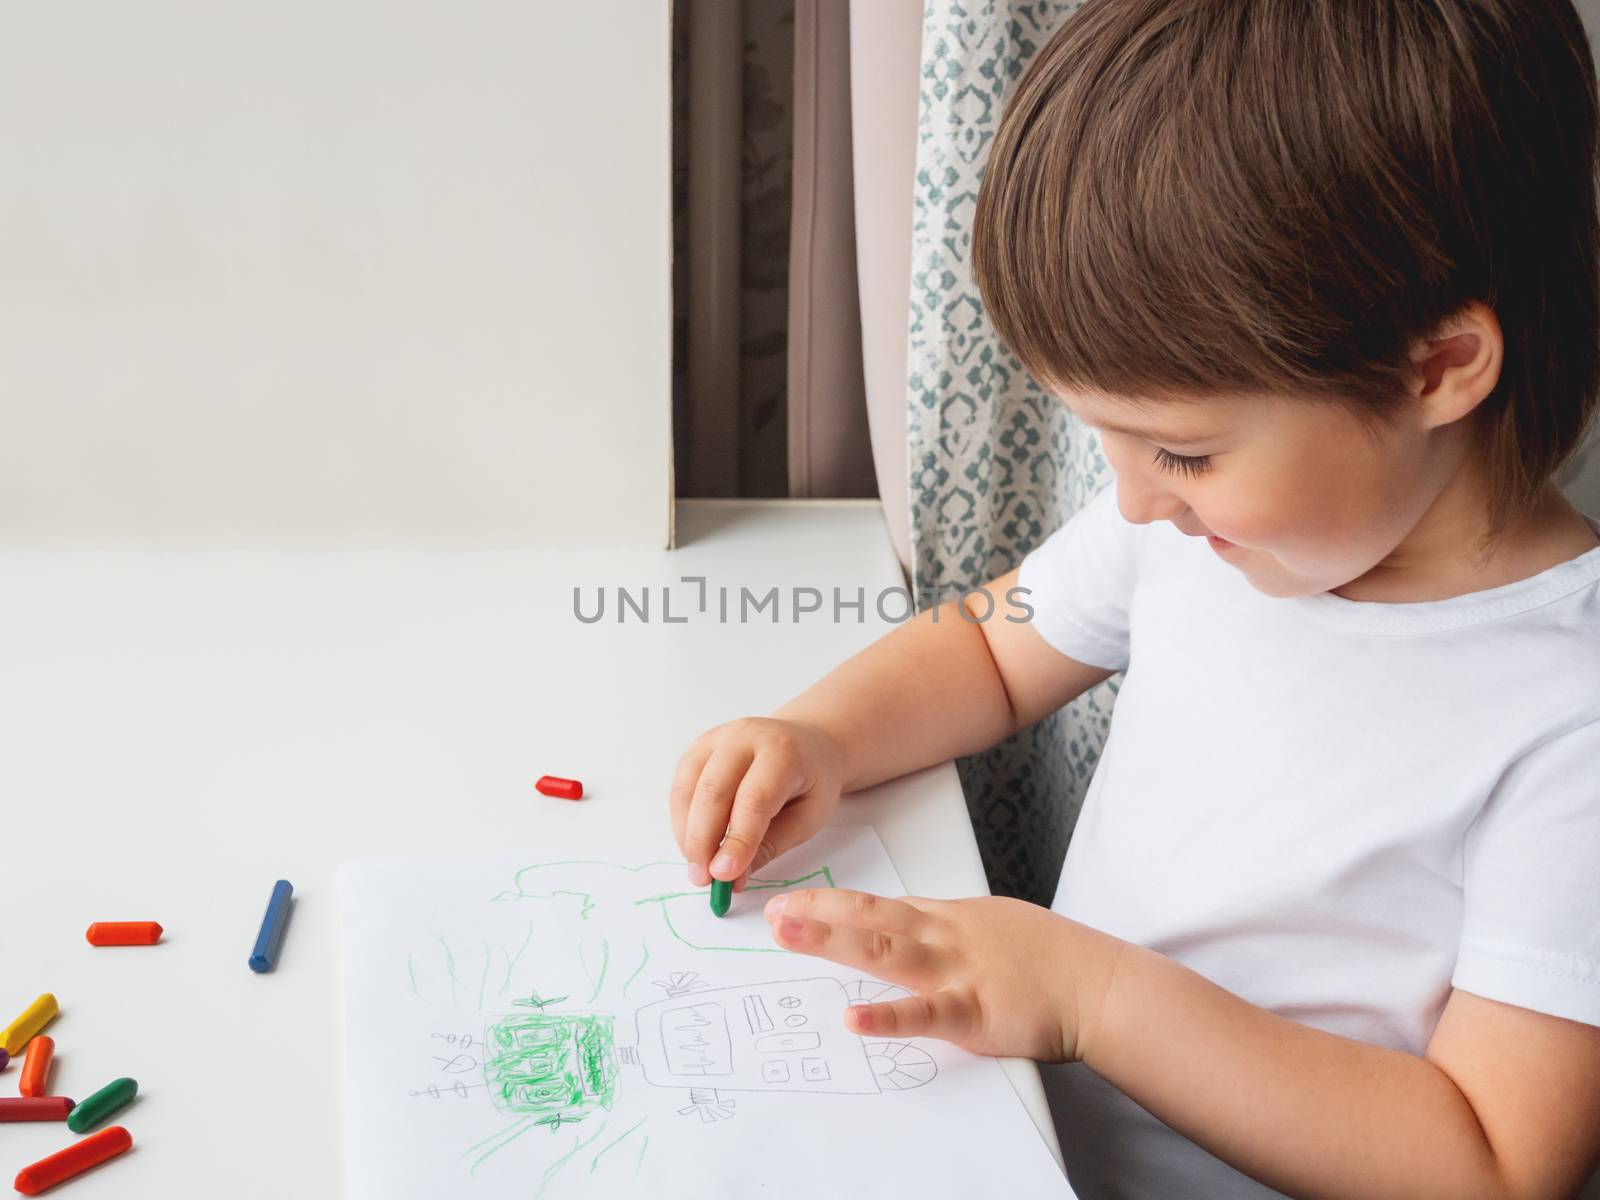 Toddler draws funny robot. Kid uses wax crayons. Smiling boy paints on paper with pencils on white windowsill.